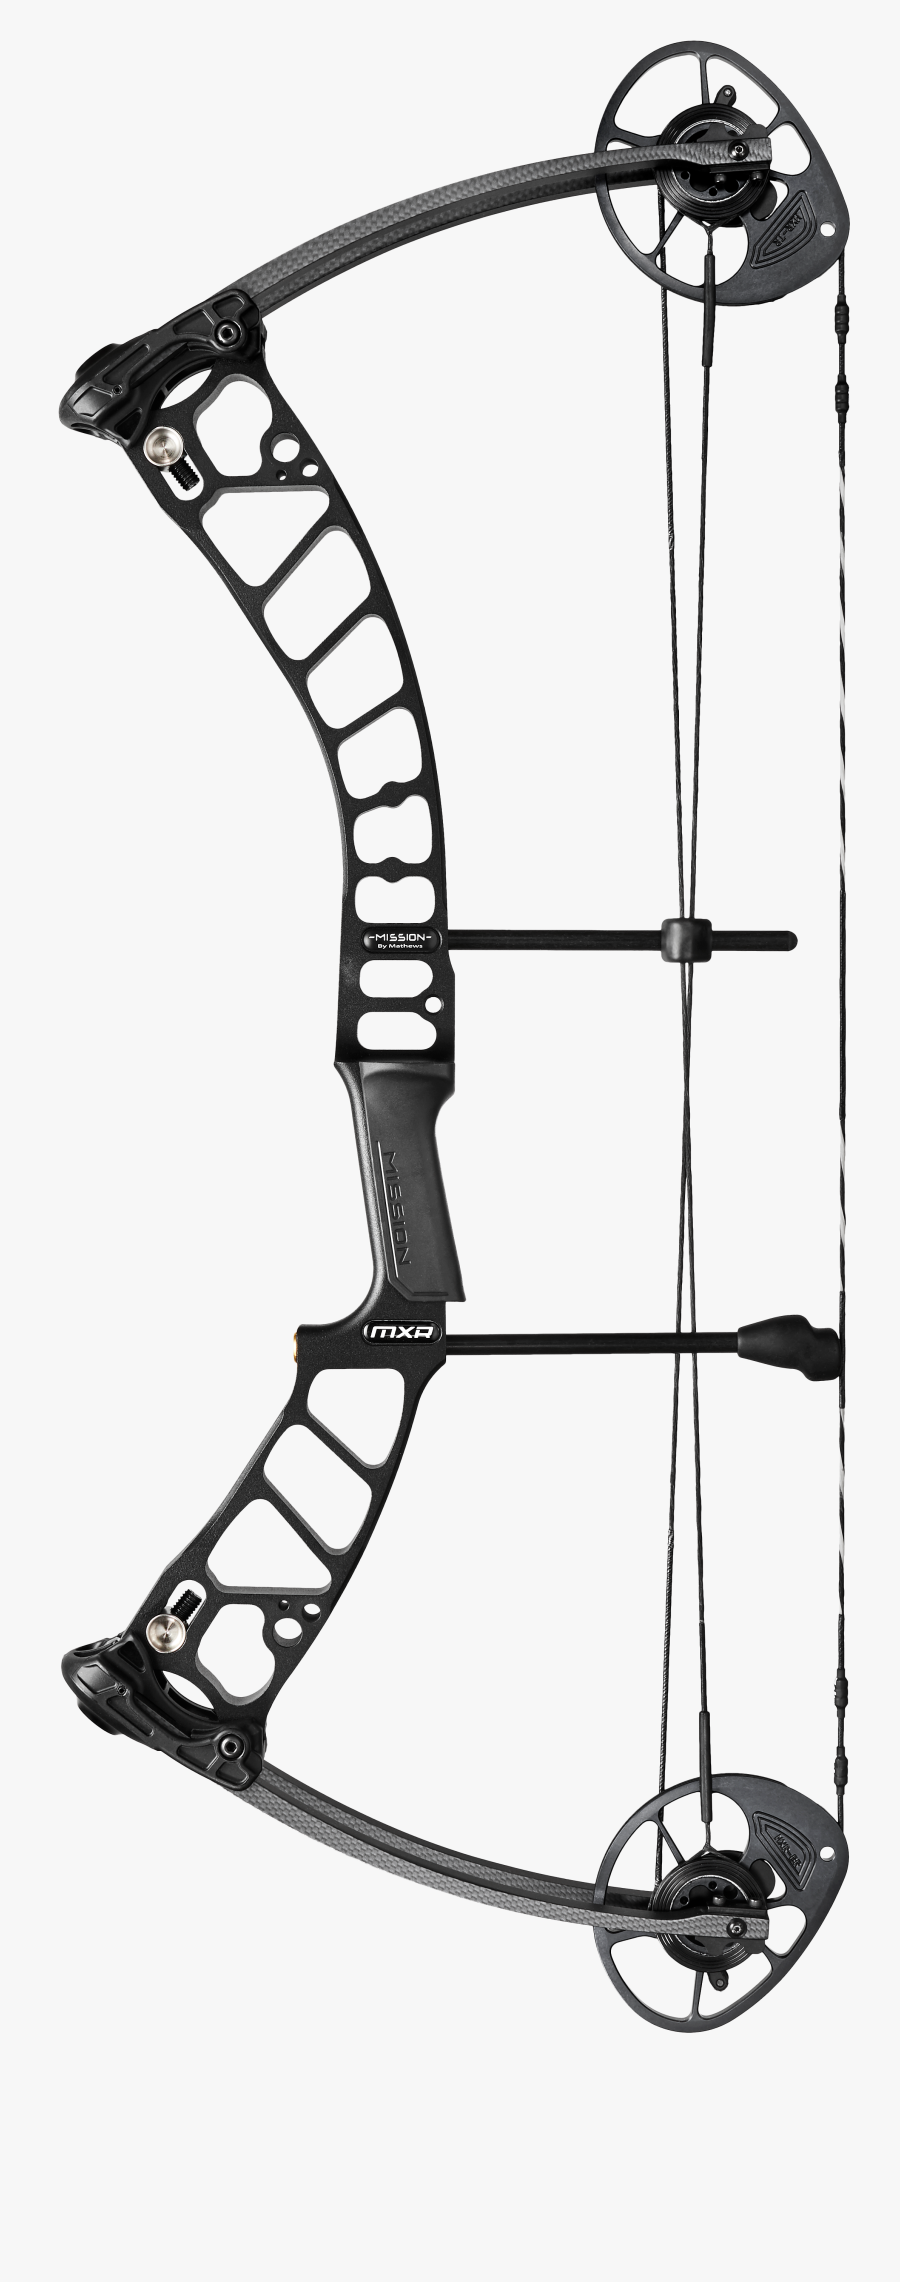 The New Grip Design Is Refined With A Thinner, More - Mathews Mission Mxr, Transparent Clipart